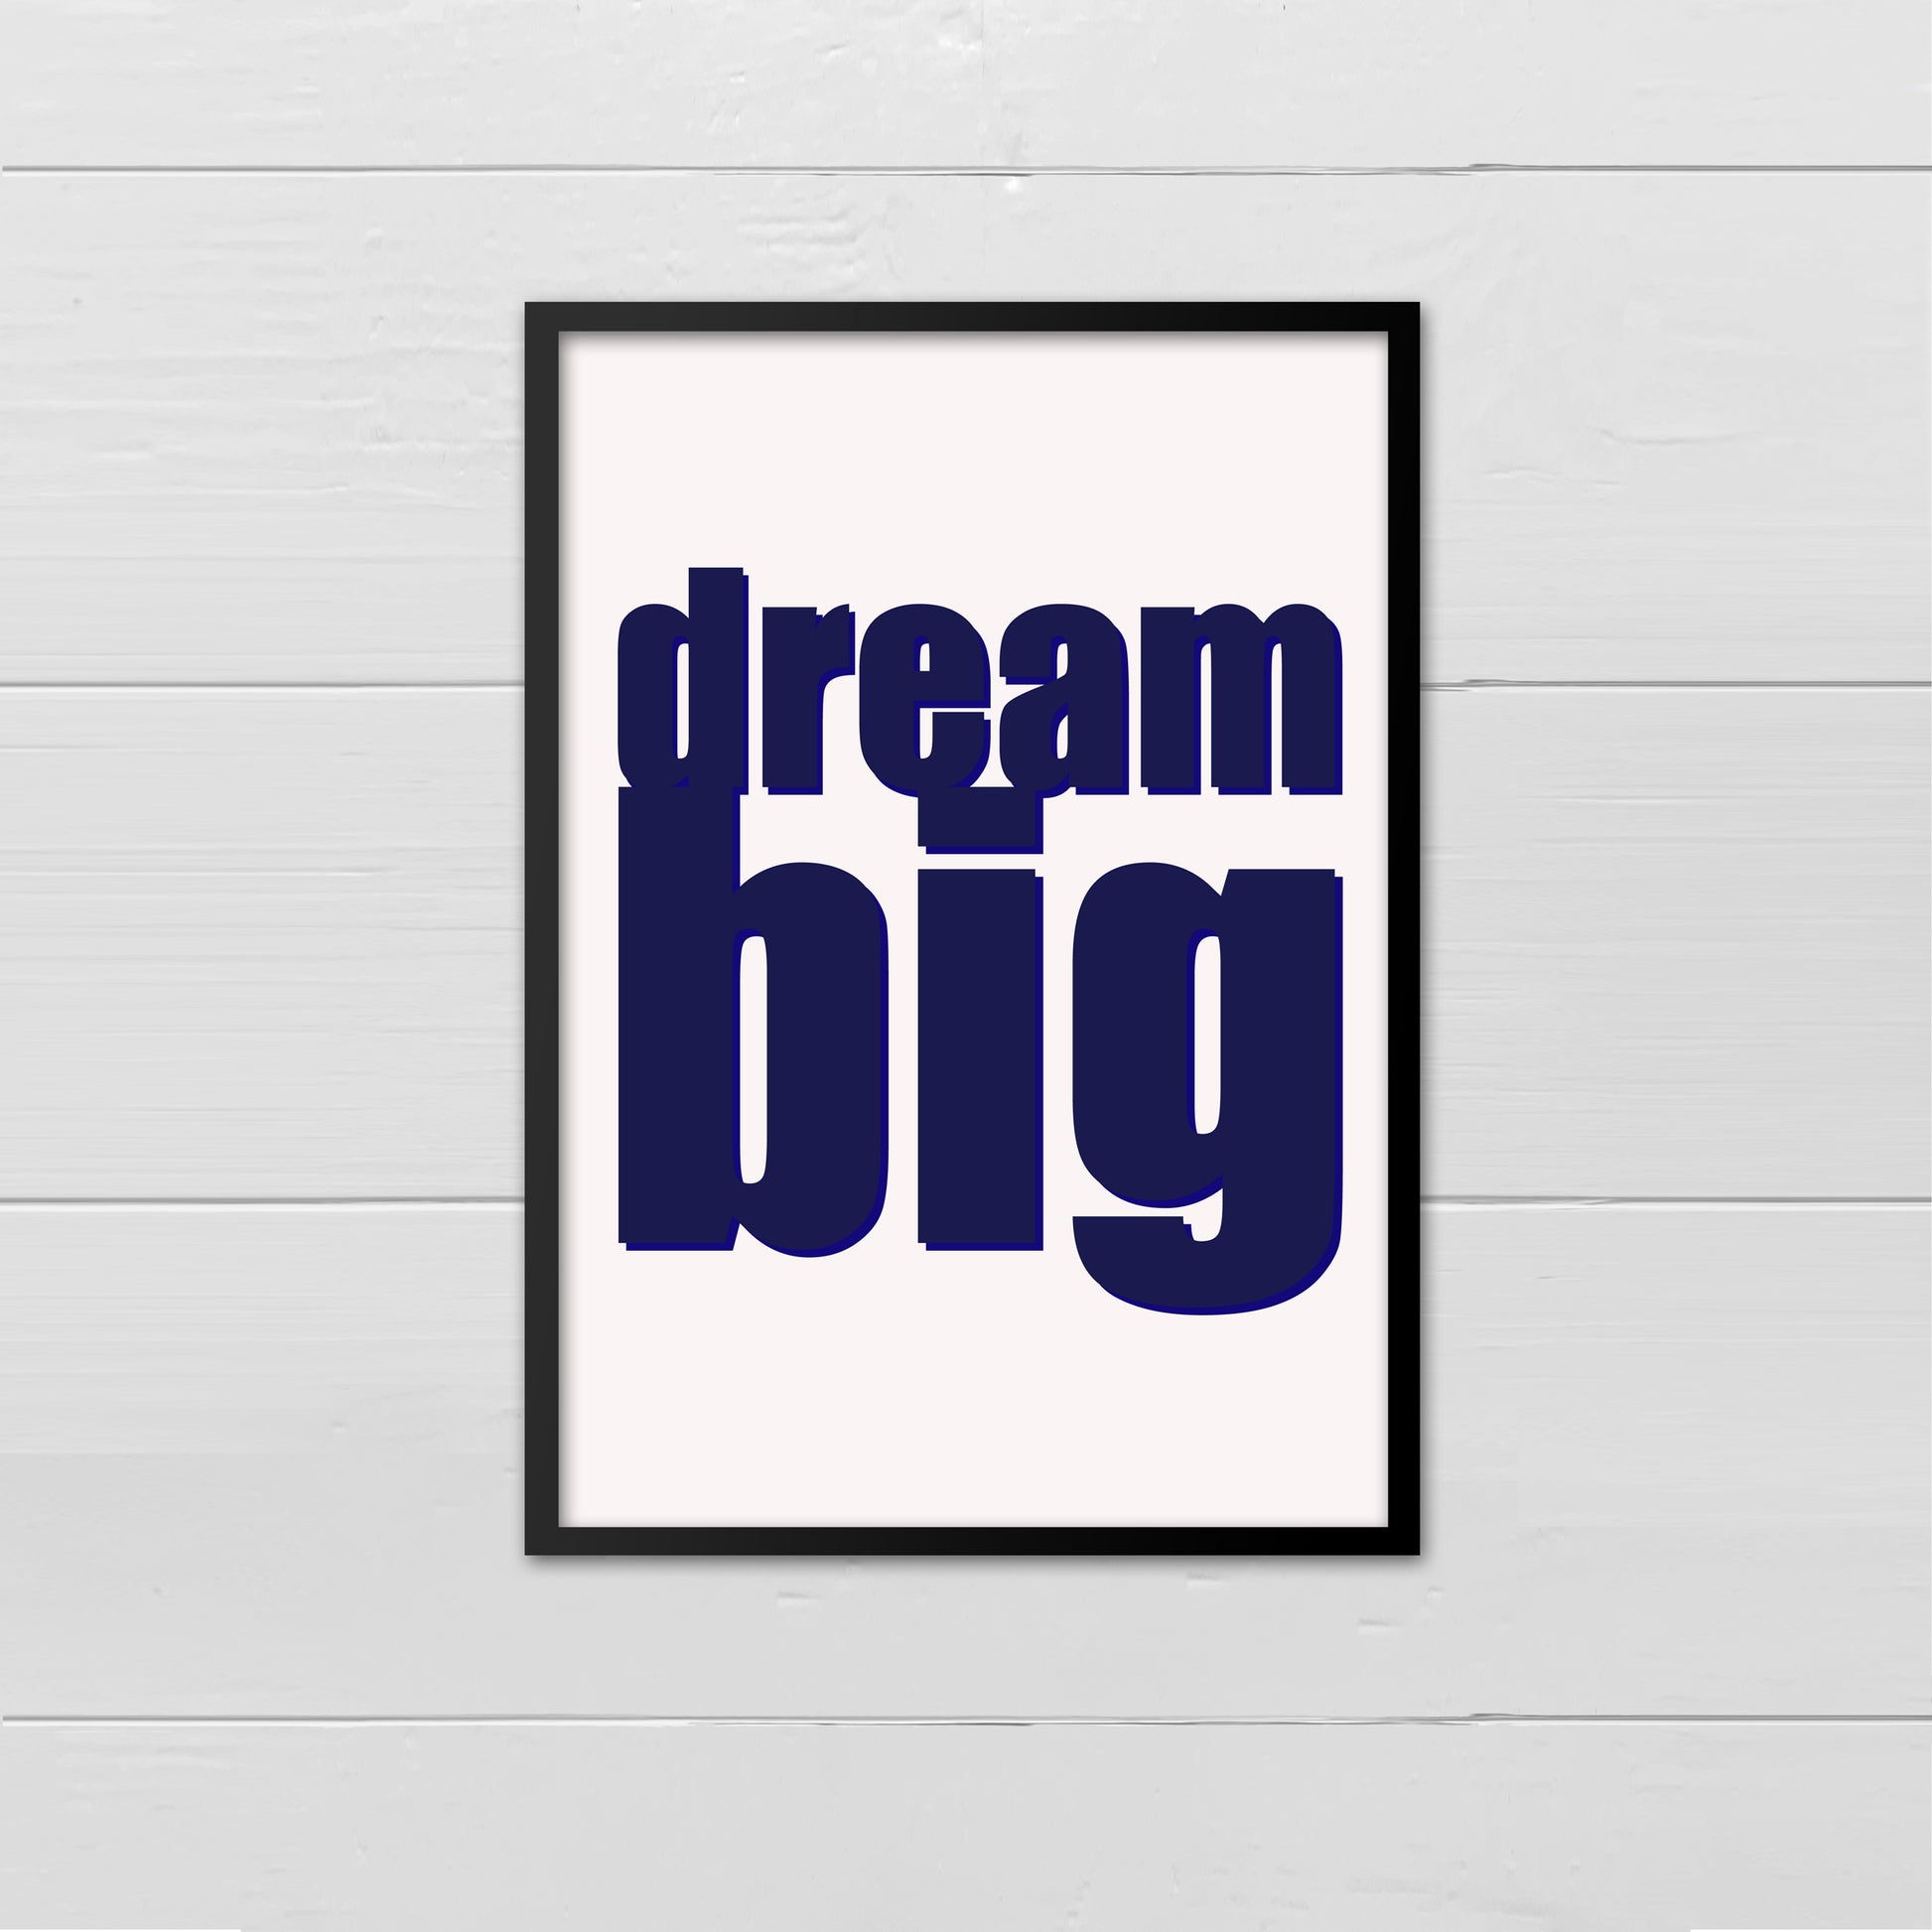 Portrait style print with the words Dream Big printed in large lowercase letters in navy onto a cream background